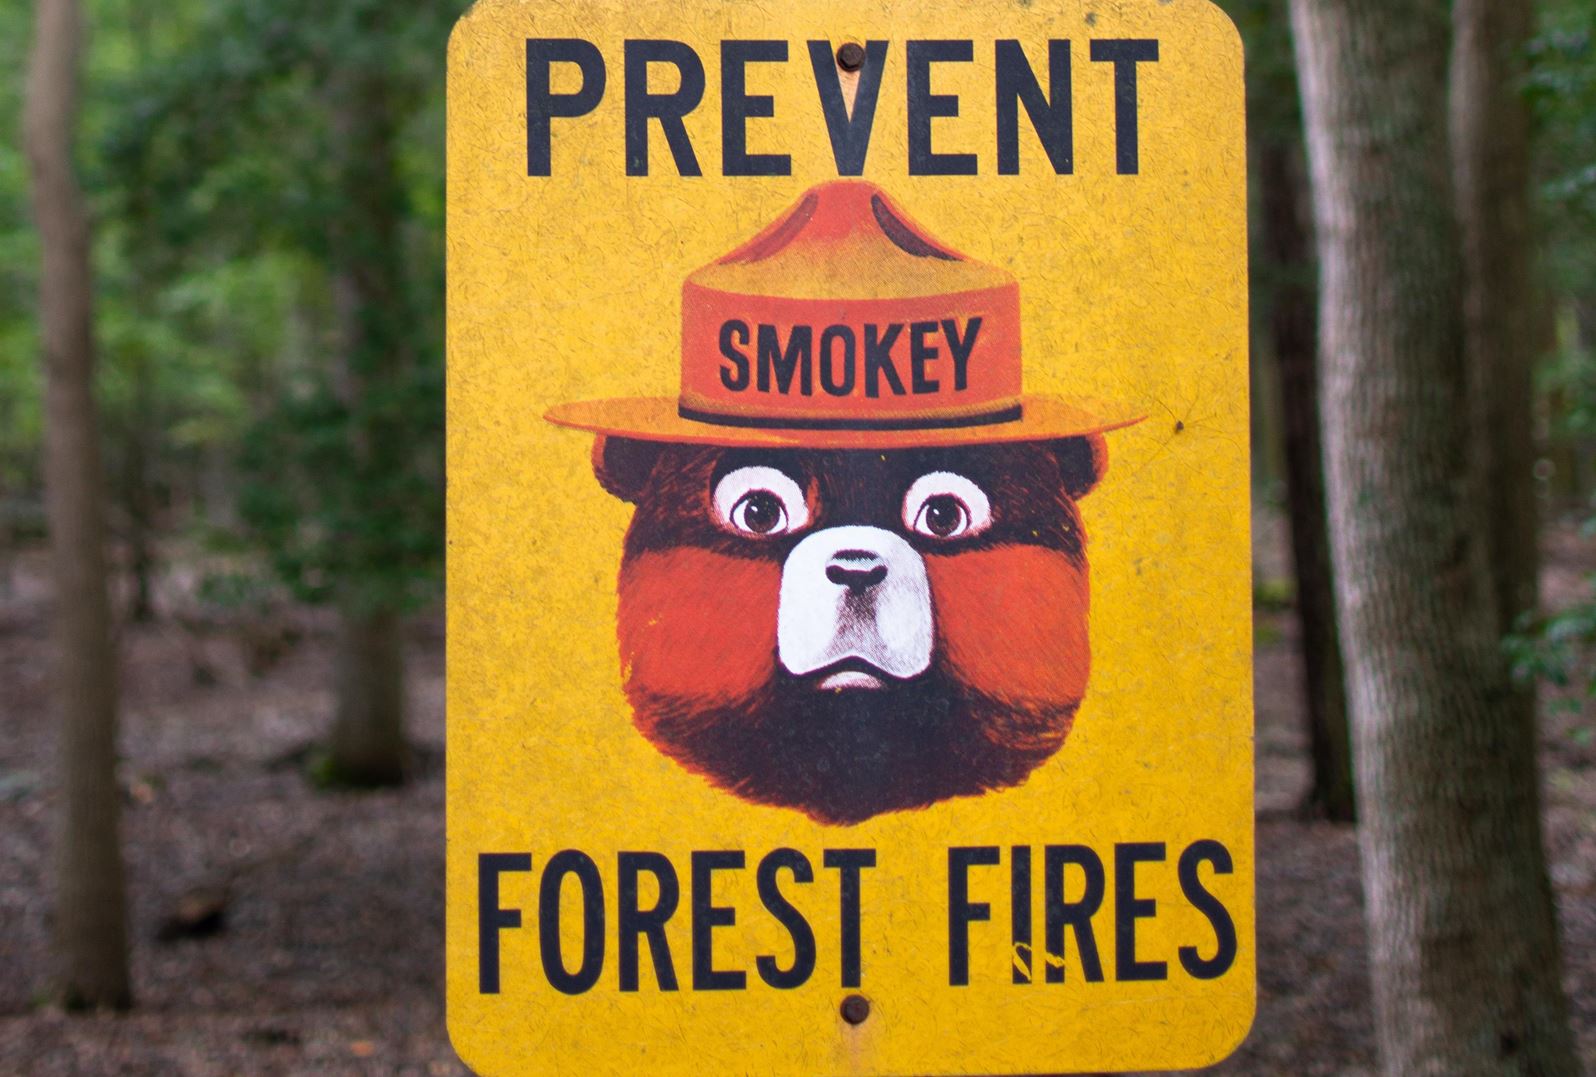 Sign in forest with Smokey Bear image